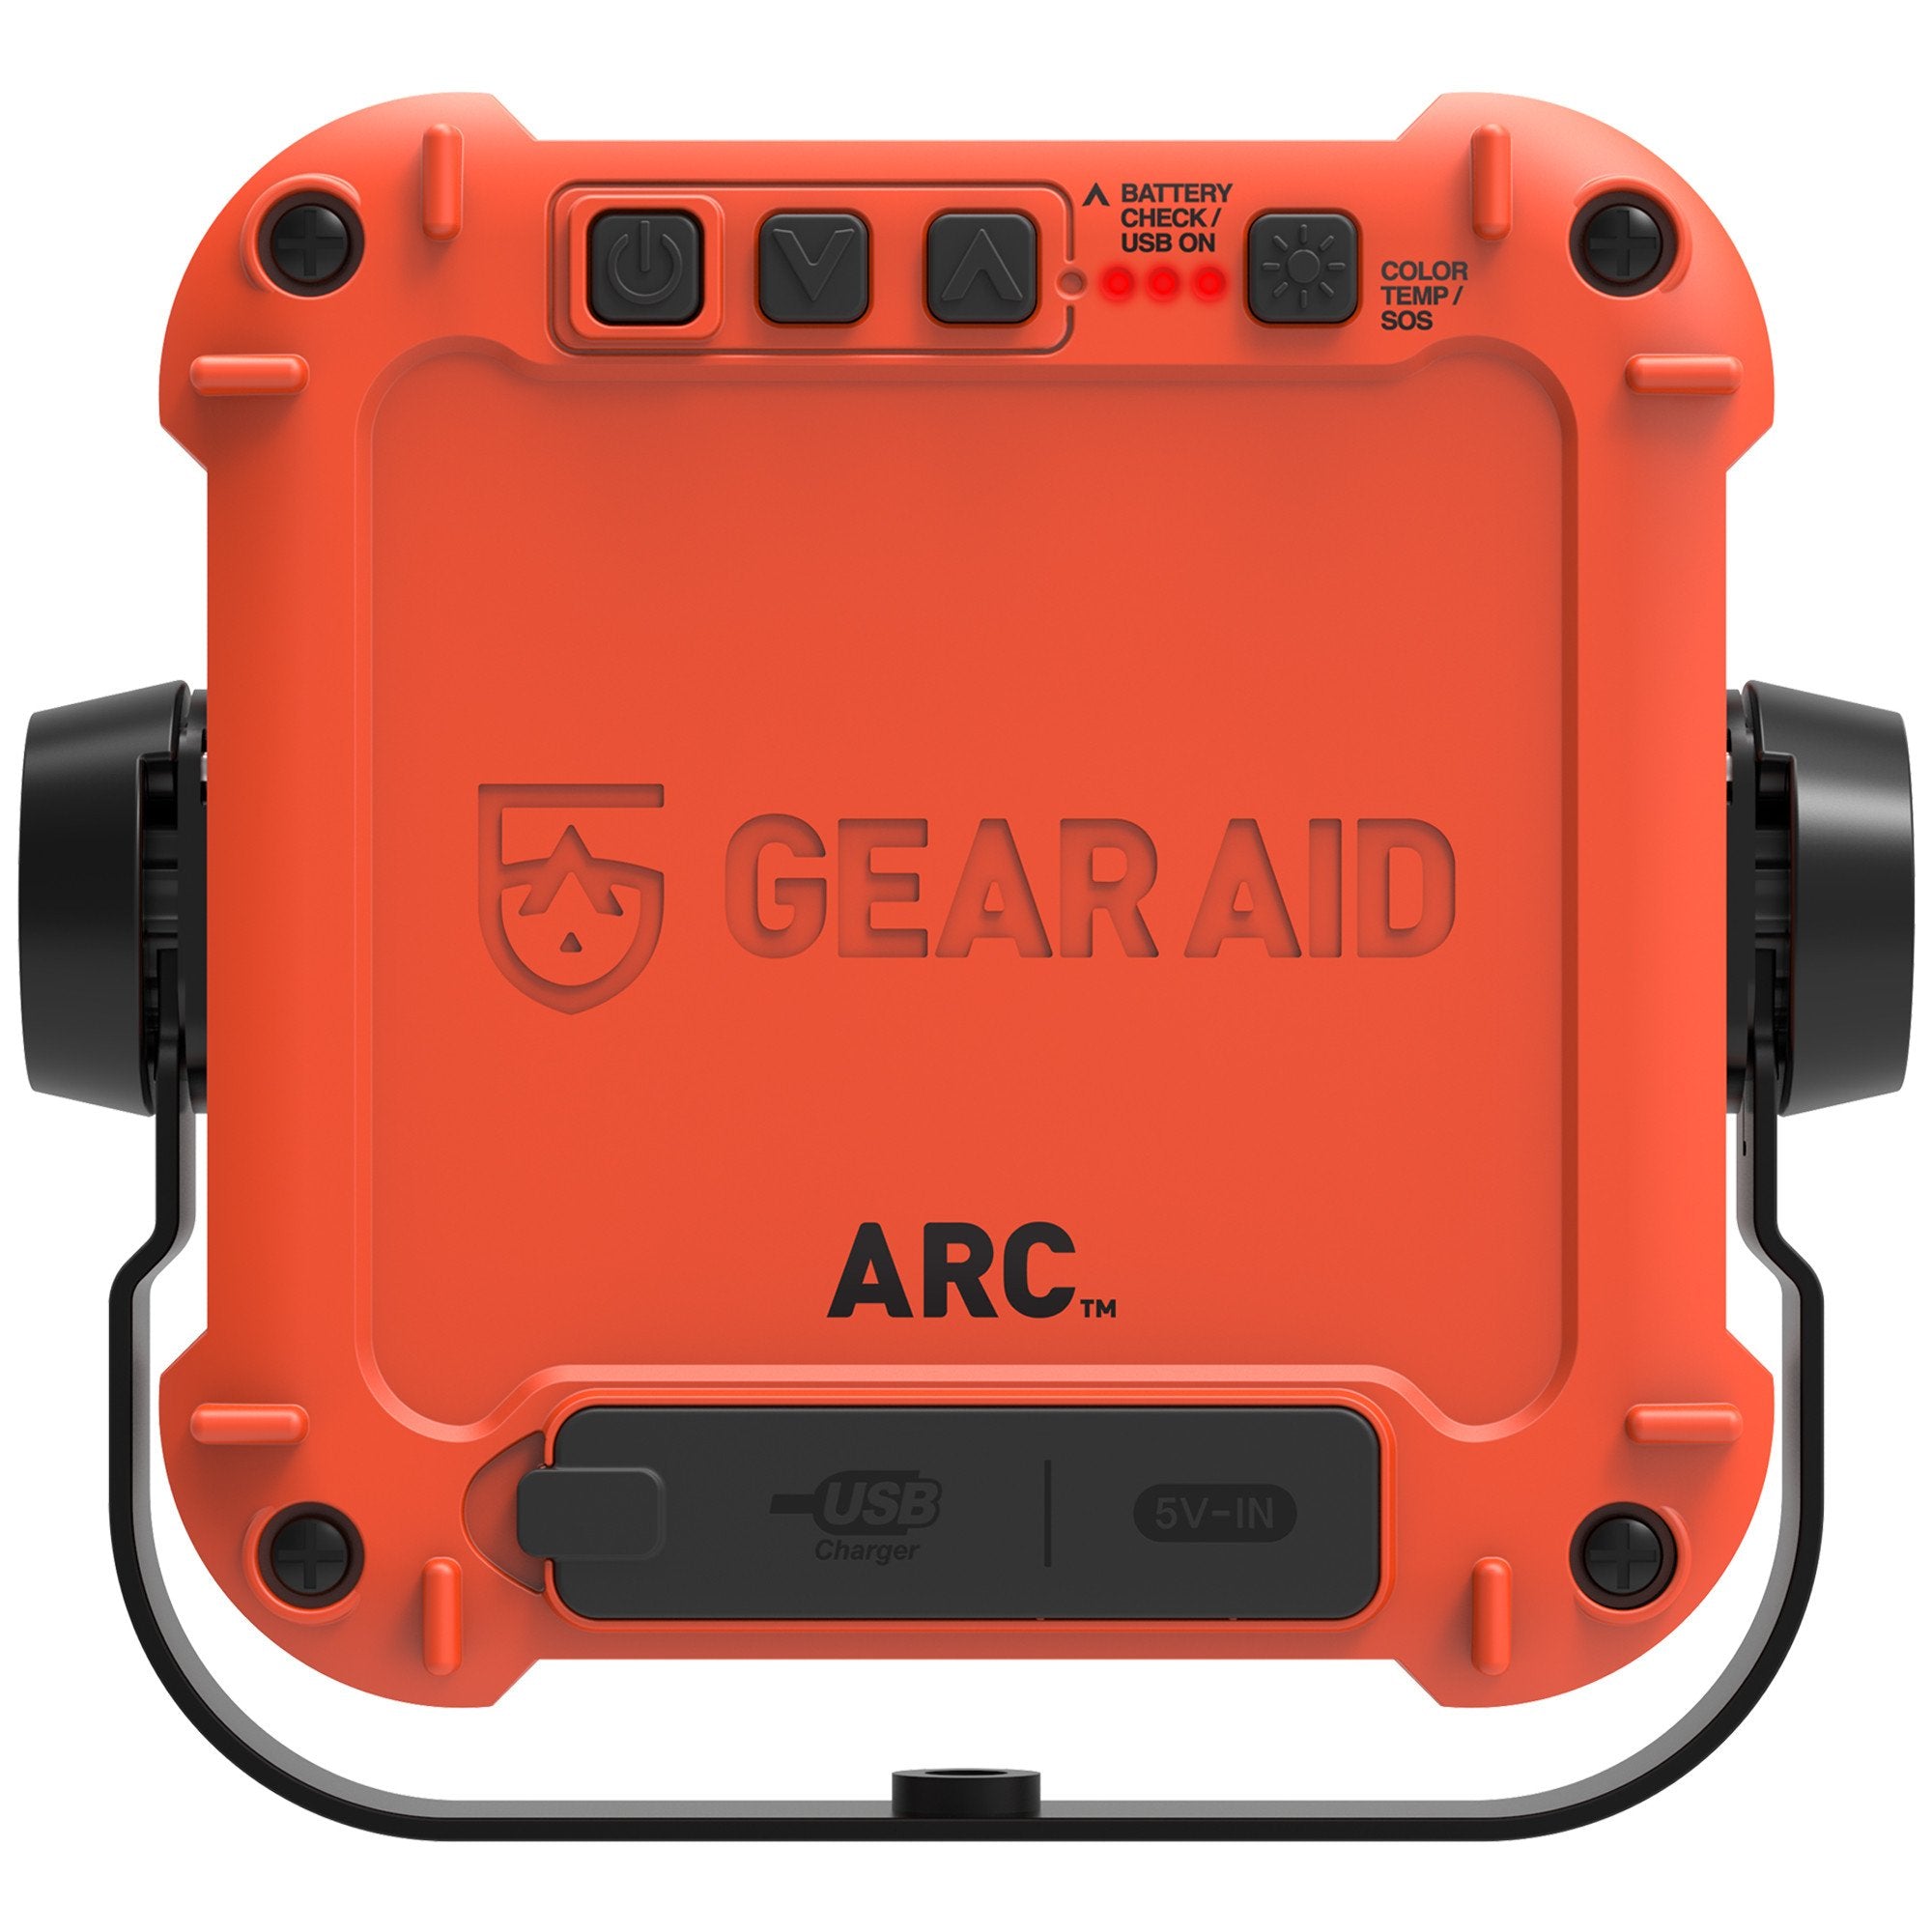 Gear Aid ARC Rechargeable LED Light and Power Station